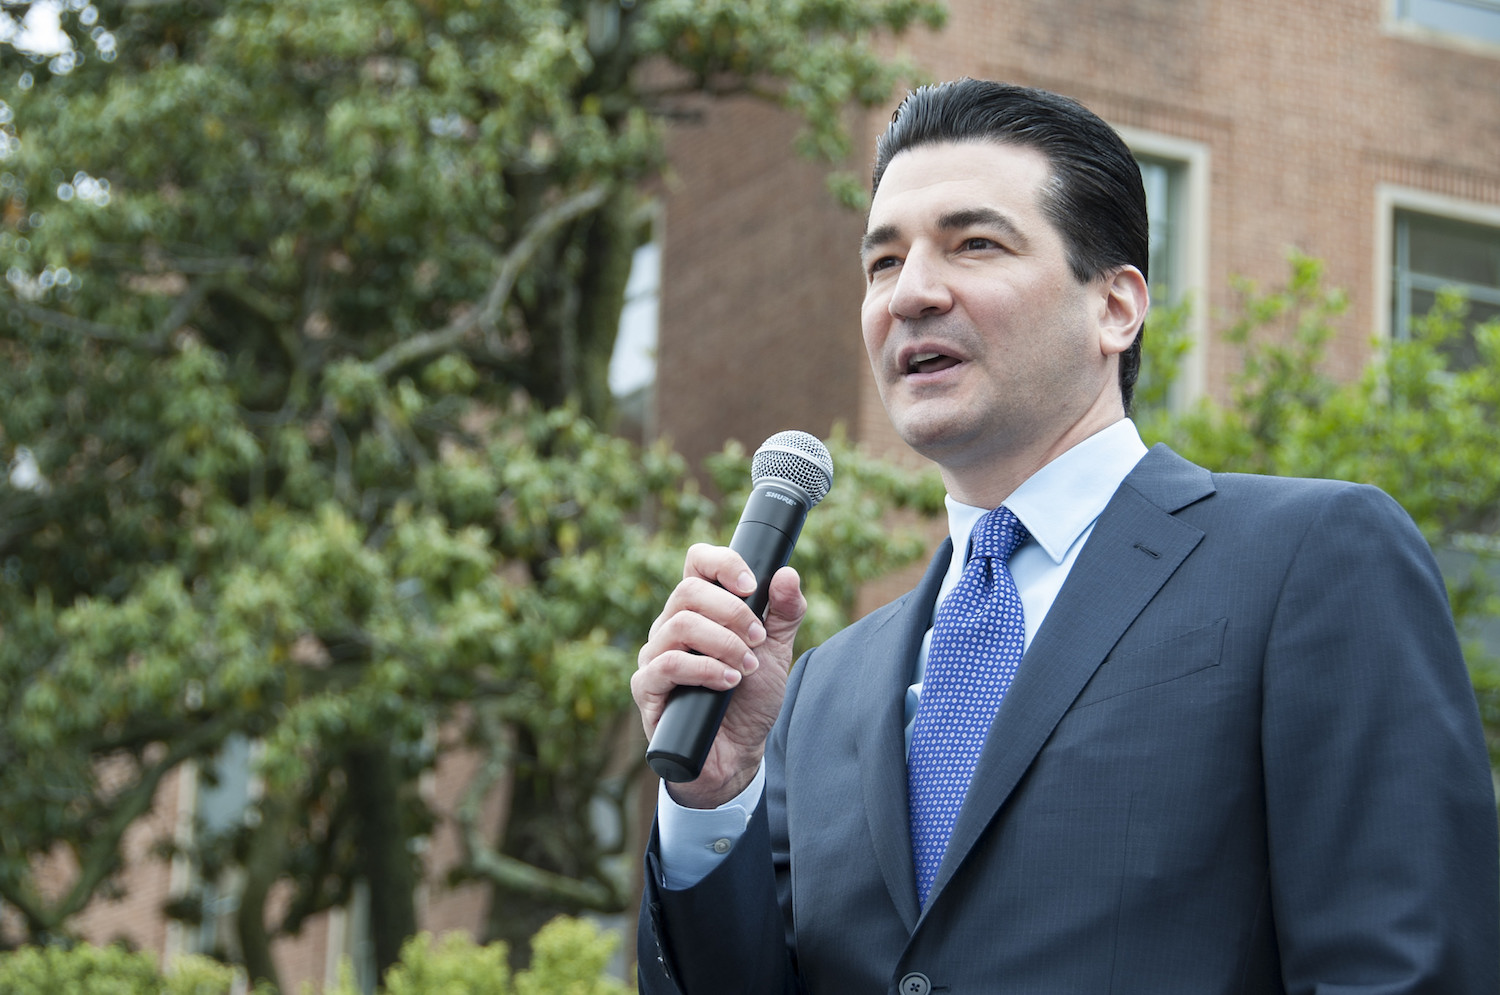 Scott Gottlieb, the FDA commissioner under Trump, has largely continued Obama-era regulations, rather than pursue a pattern of deregulation that Trump touted on the campaign field. Credit: FDA, October 2018